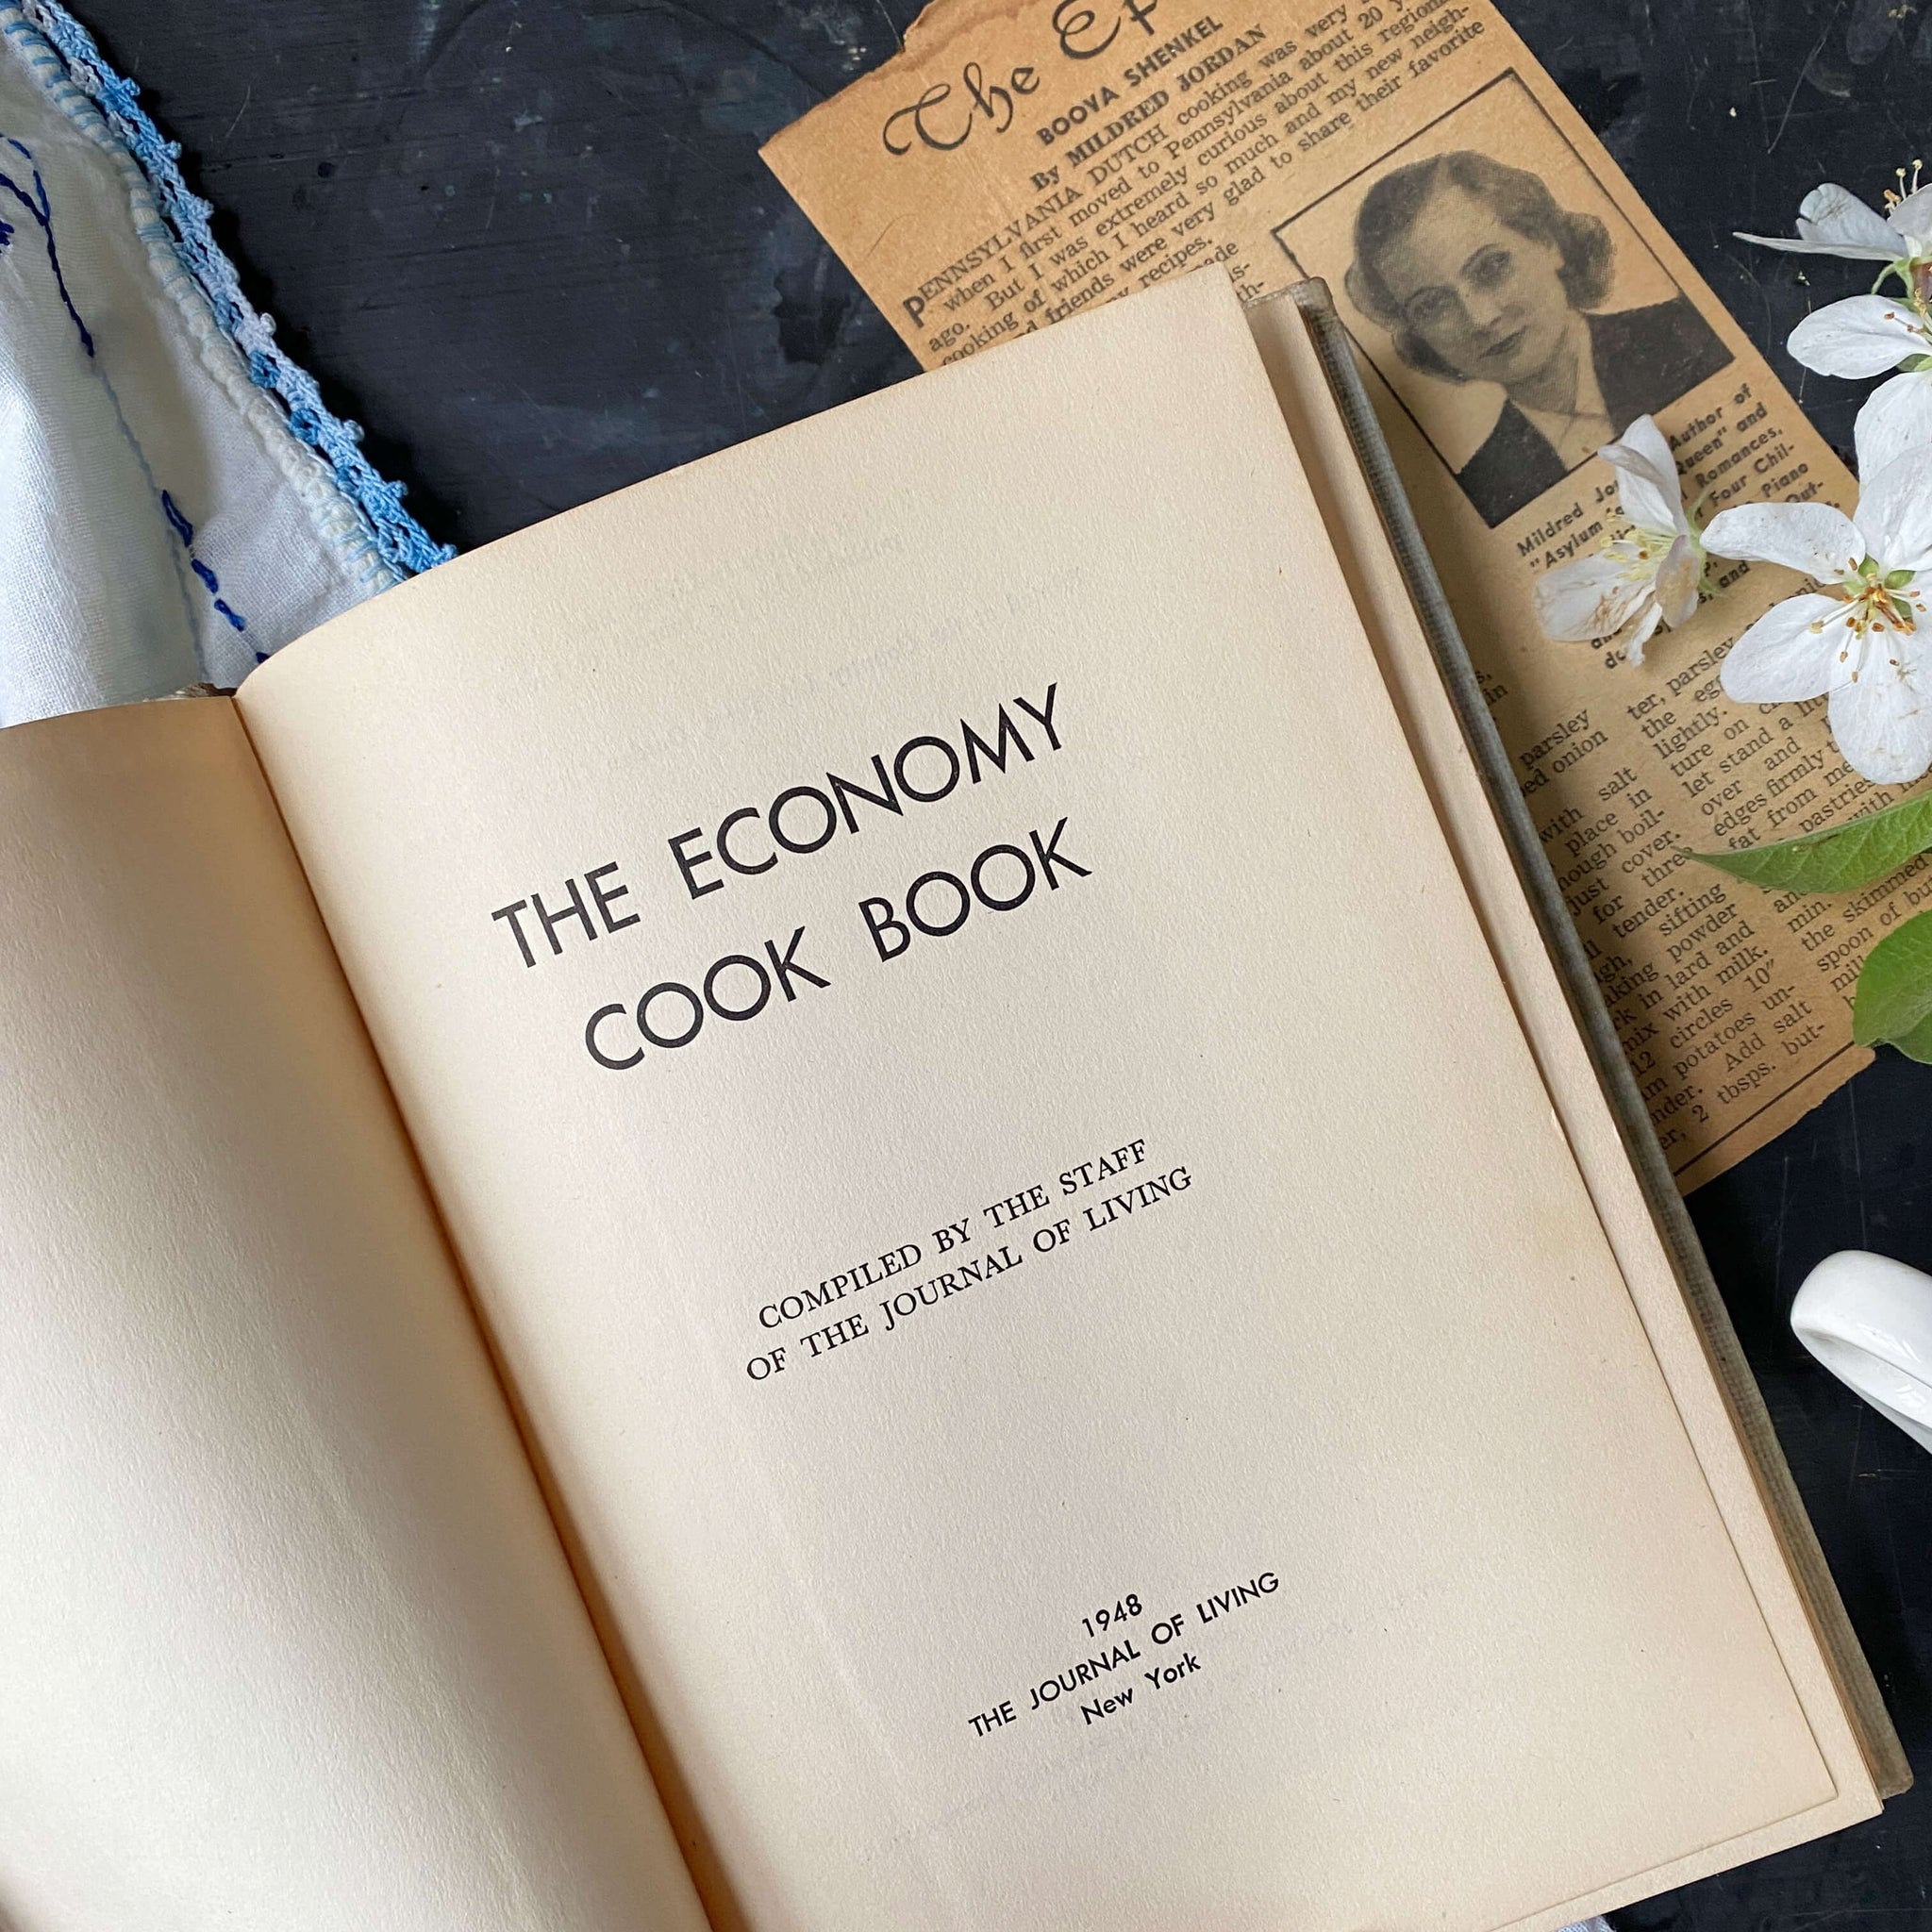 The Economy Cook Book by the Journal of Living Magazine circa 1948